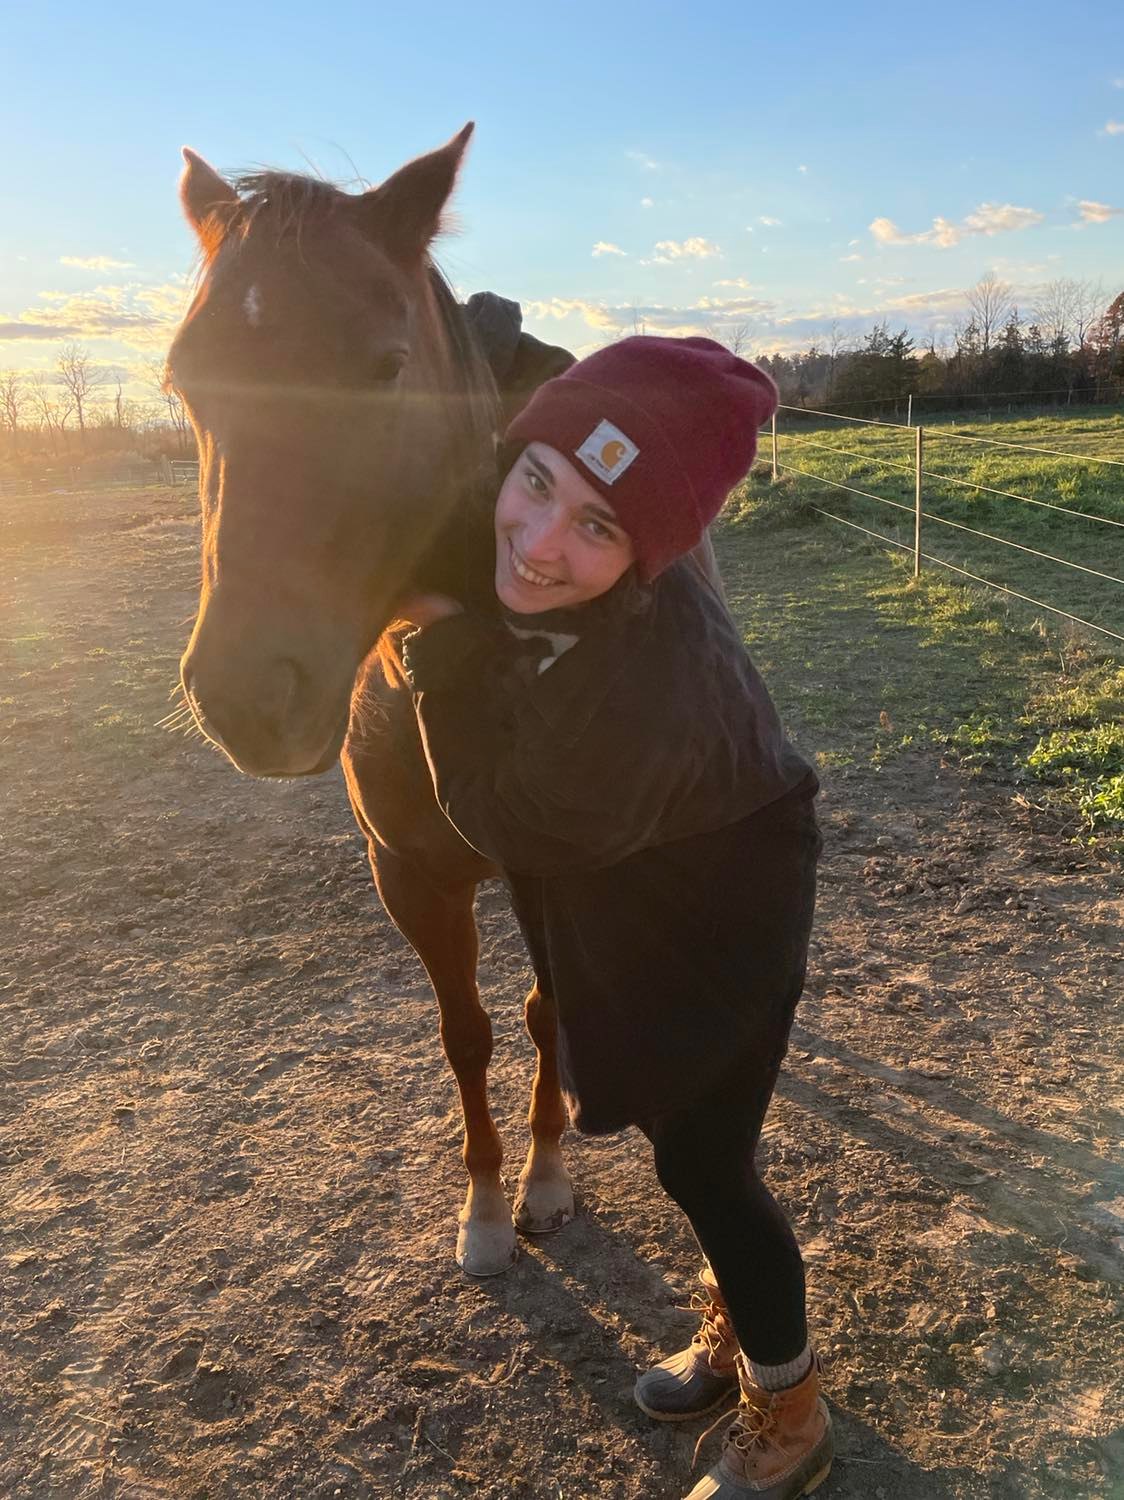 A woman wearing a red knit cap and hugging a brown horse's neck and smiling outdoors